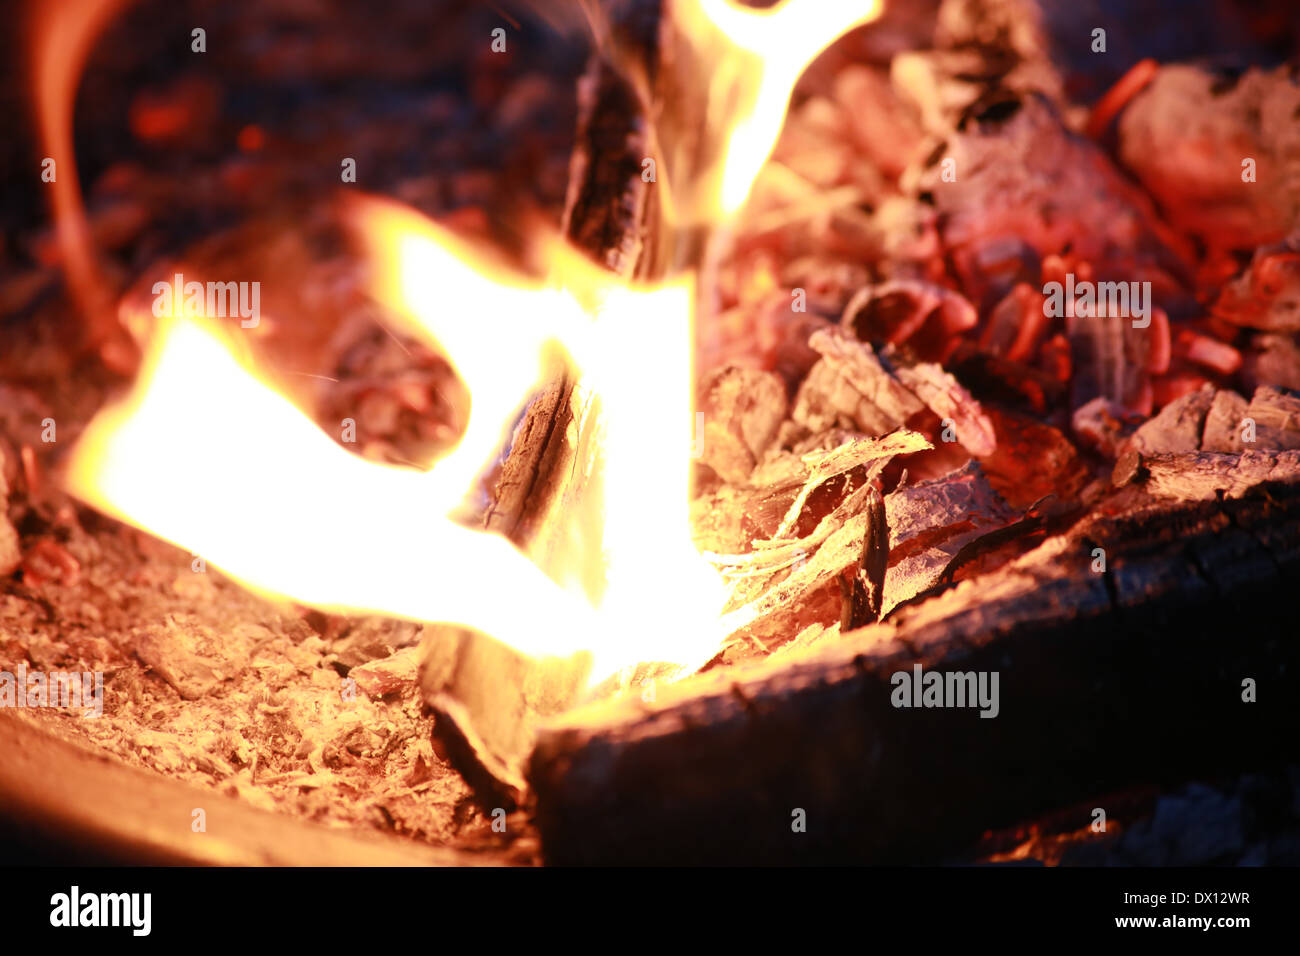 Fire burning in a firepit together with some embers and ashes Stock Photo